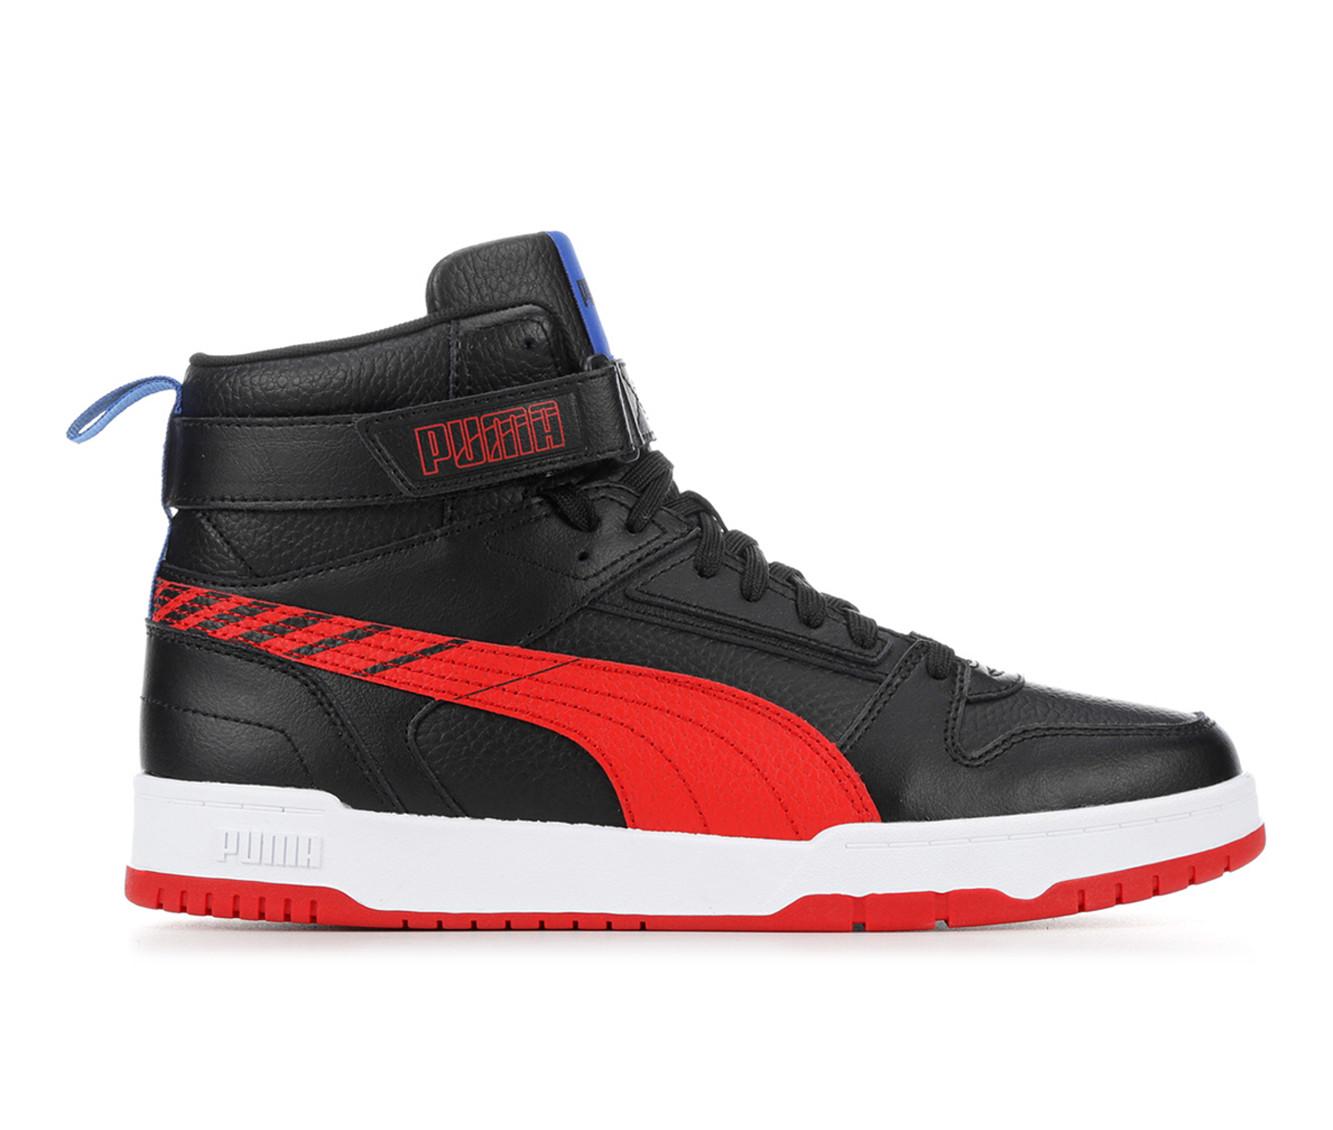 Buy Trinity Mid Hybrid Sneakers Men's Footwear from Puma. Find Puma fashion  & more at